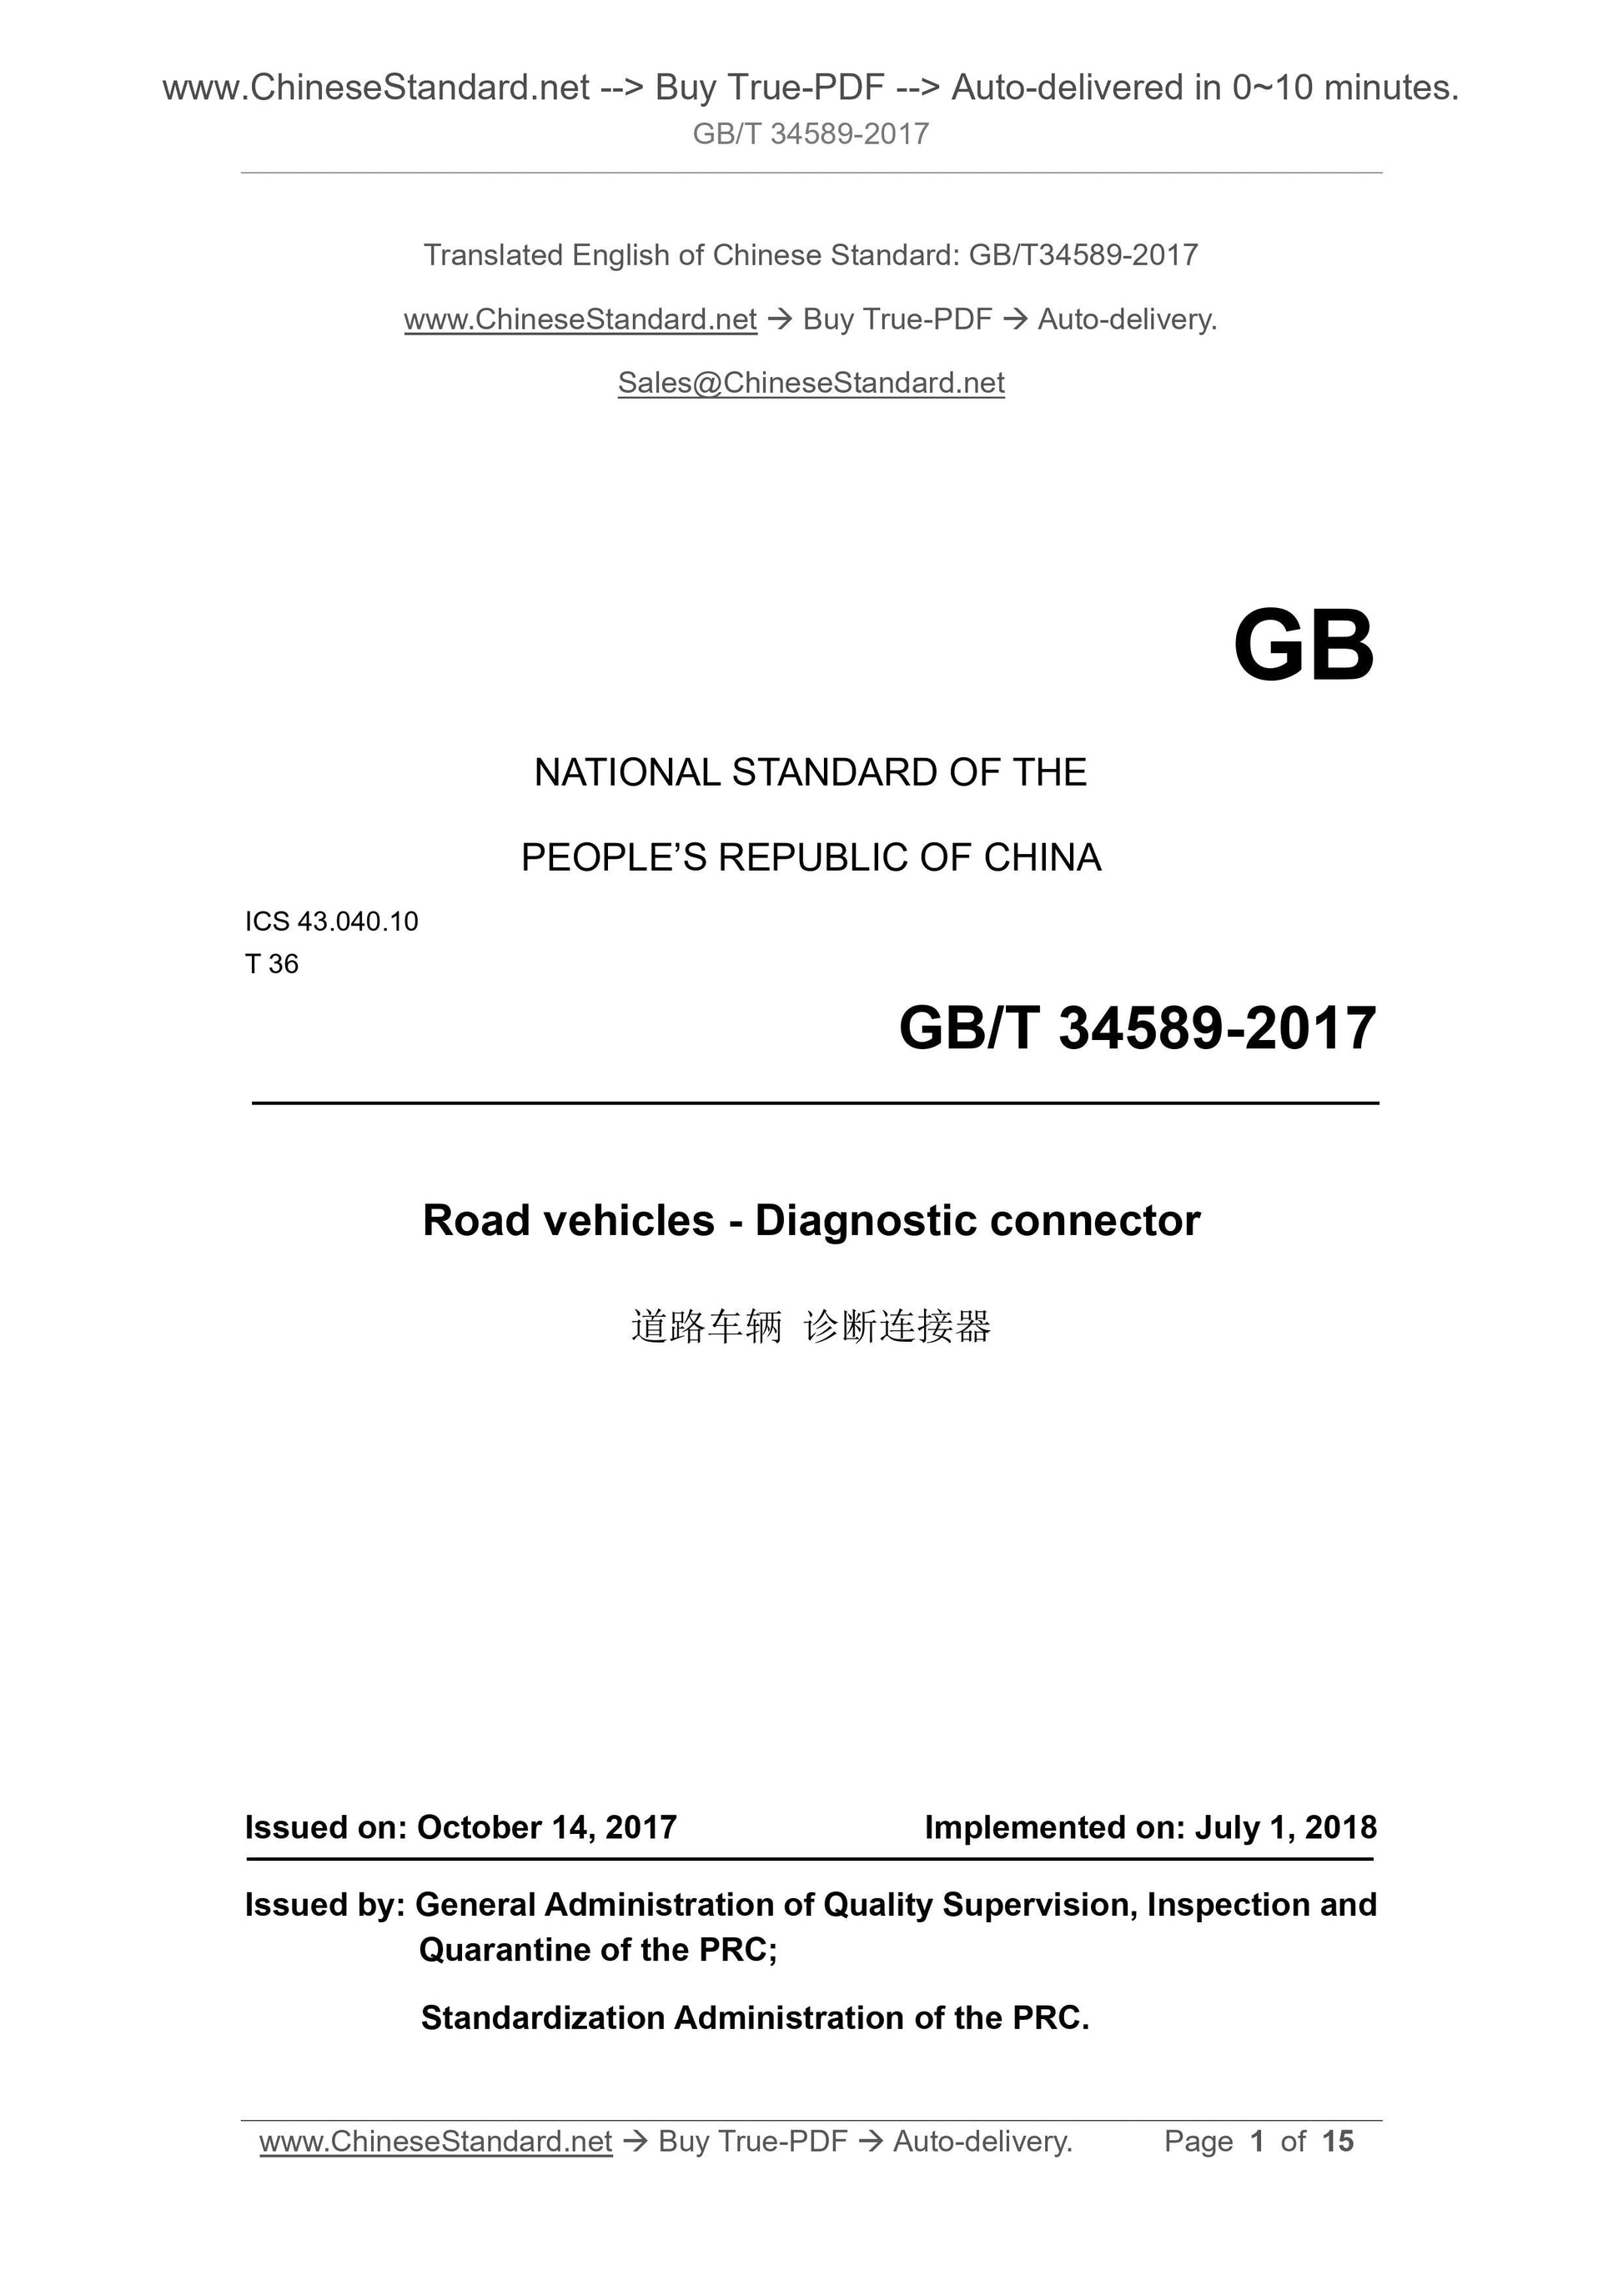 GB/T 34589-2017 Page 1